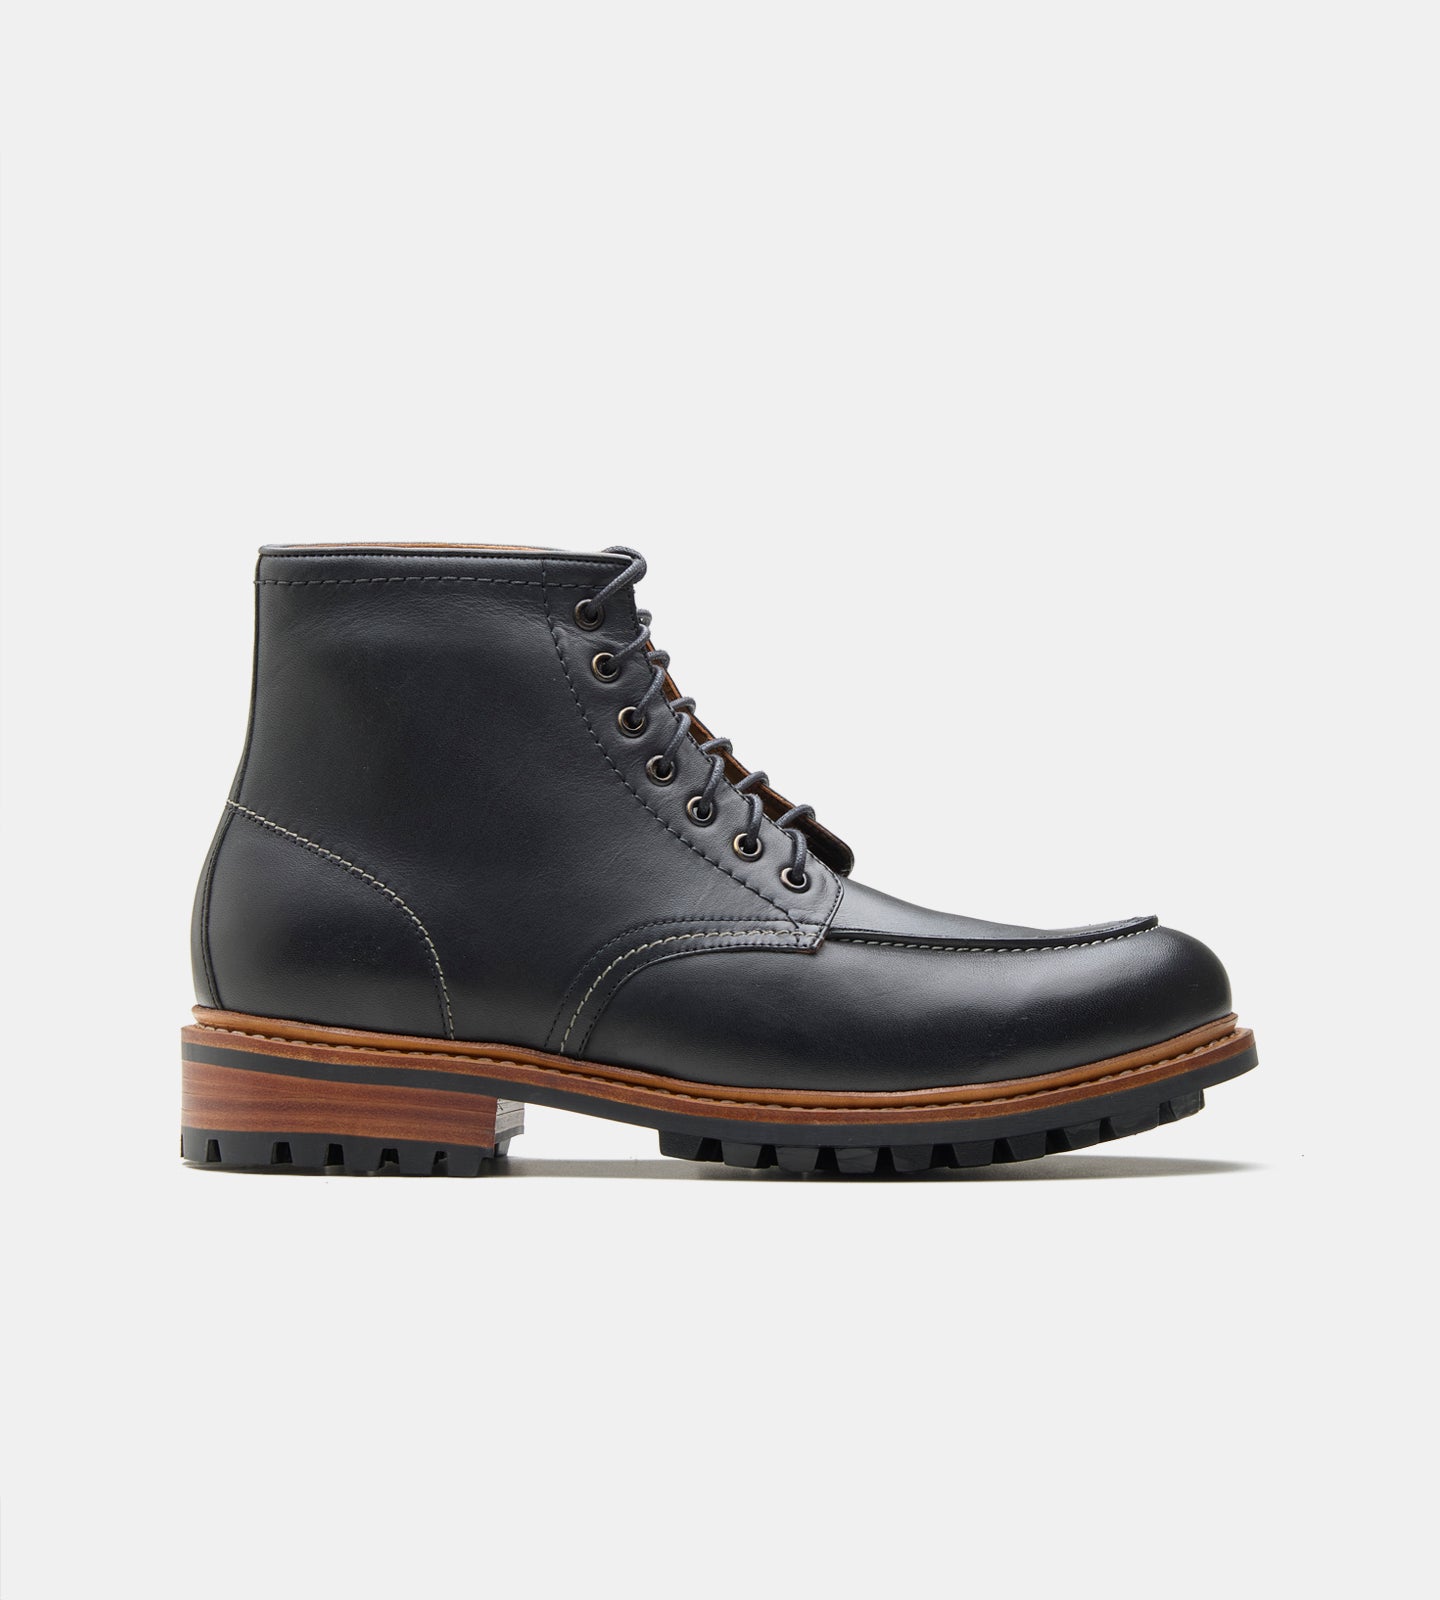 Goodyear Welted Black Moctoe Boot